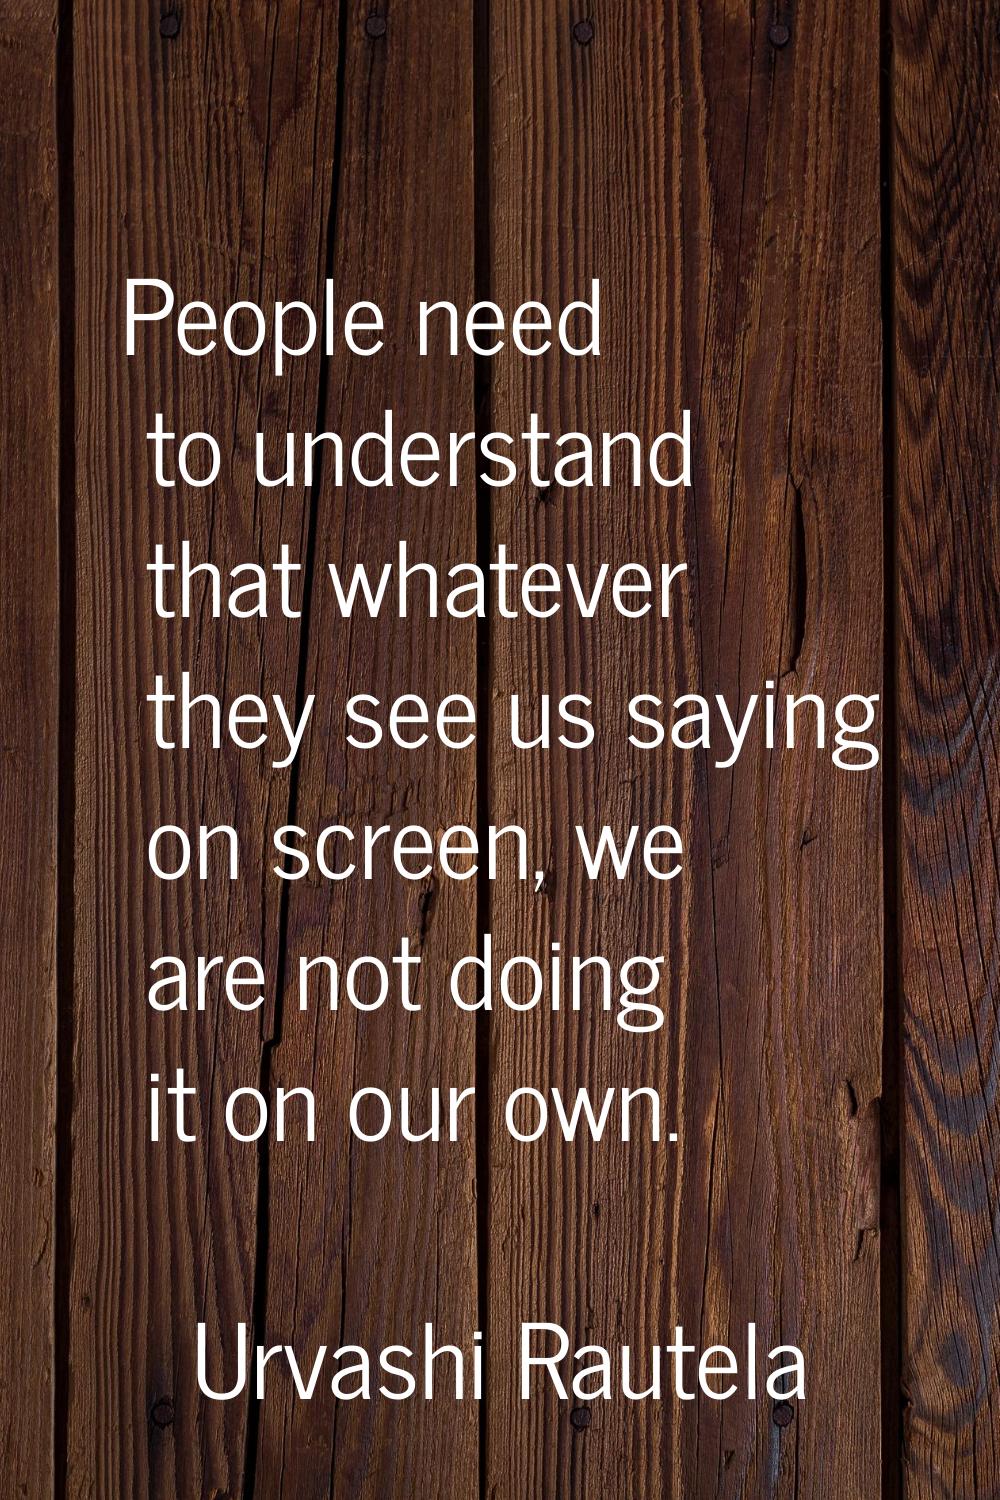 People need to understand that whatever they see us saying on screen, we are not doing it on our ow